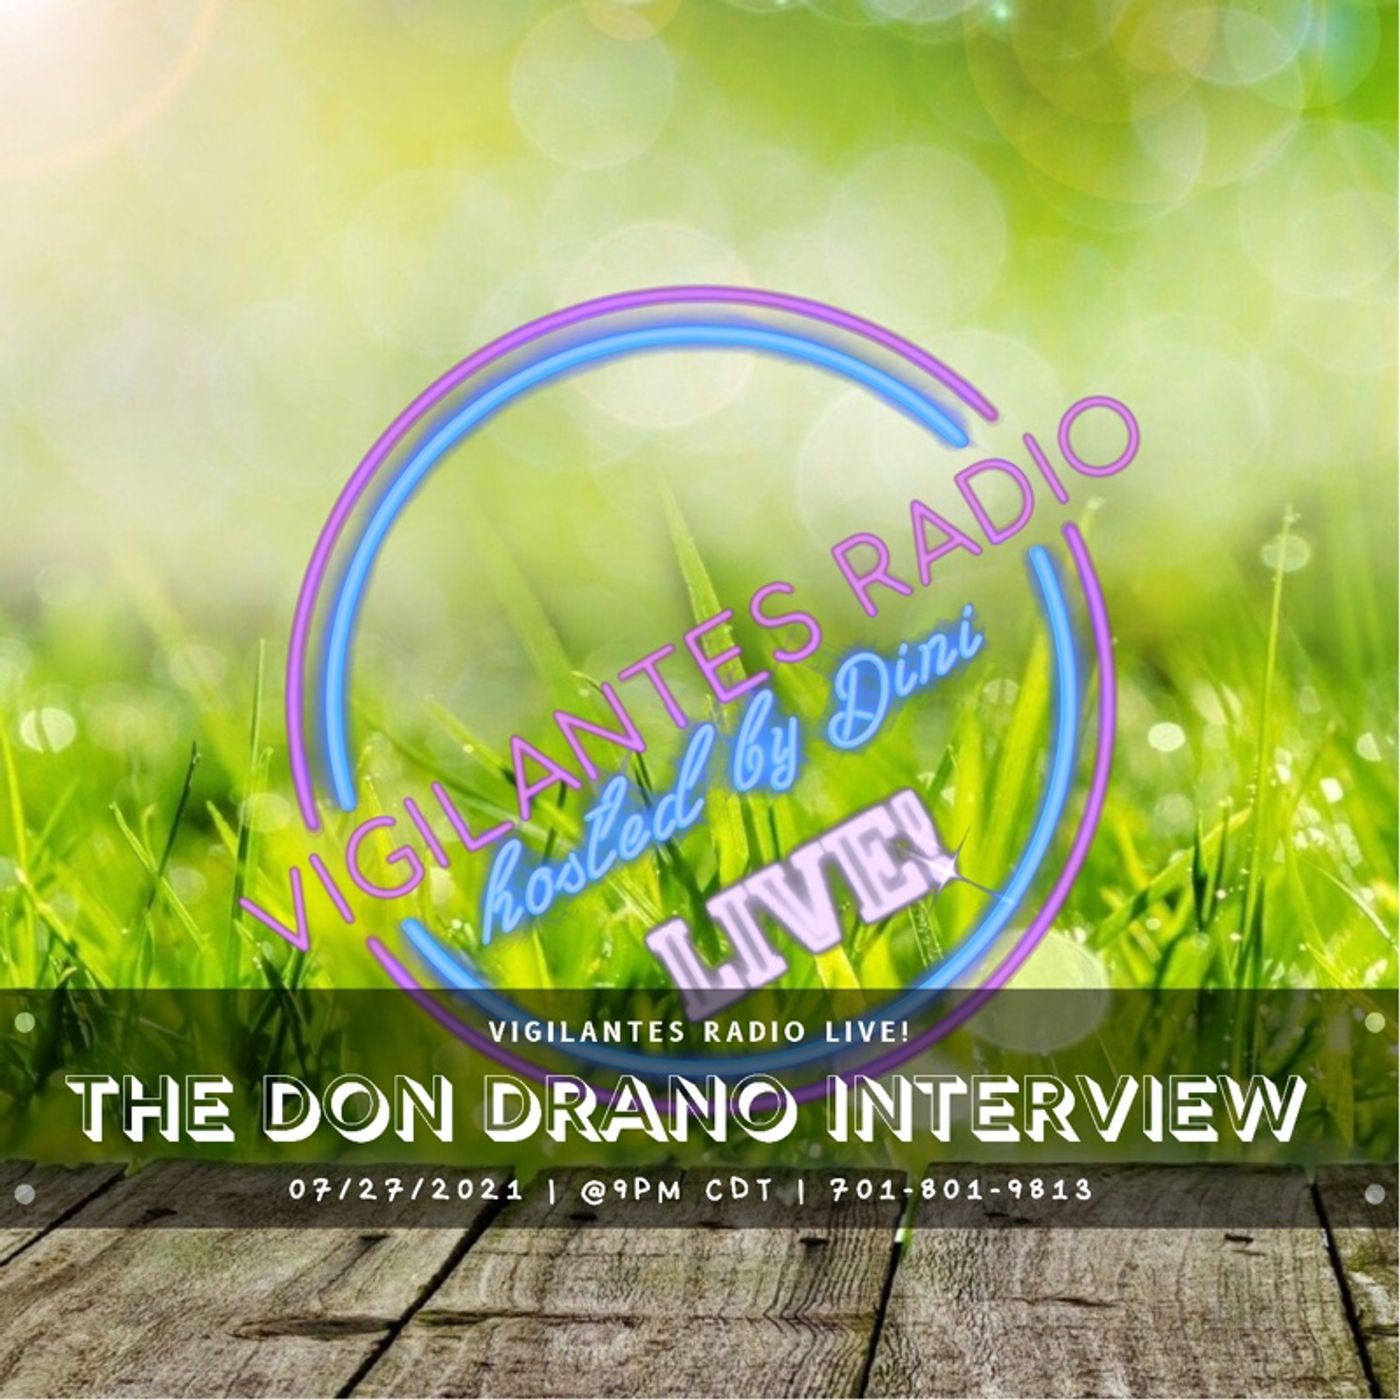 The Don Drano Interview. Image